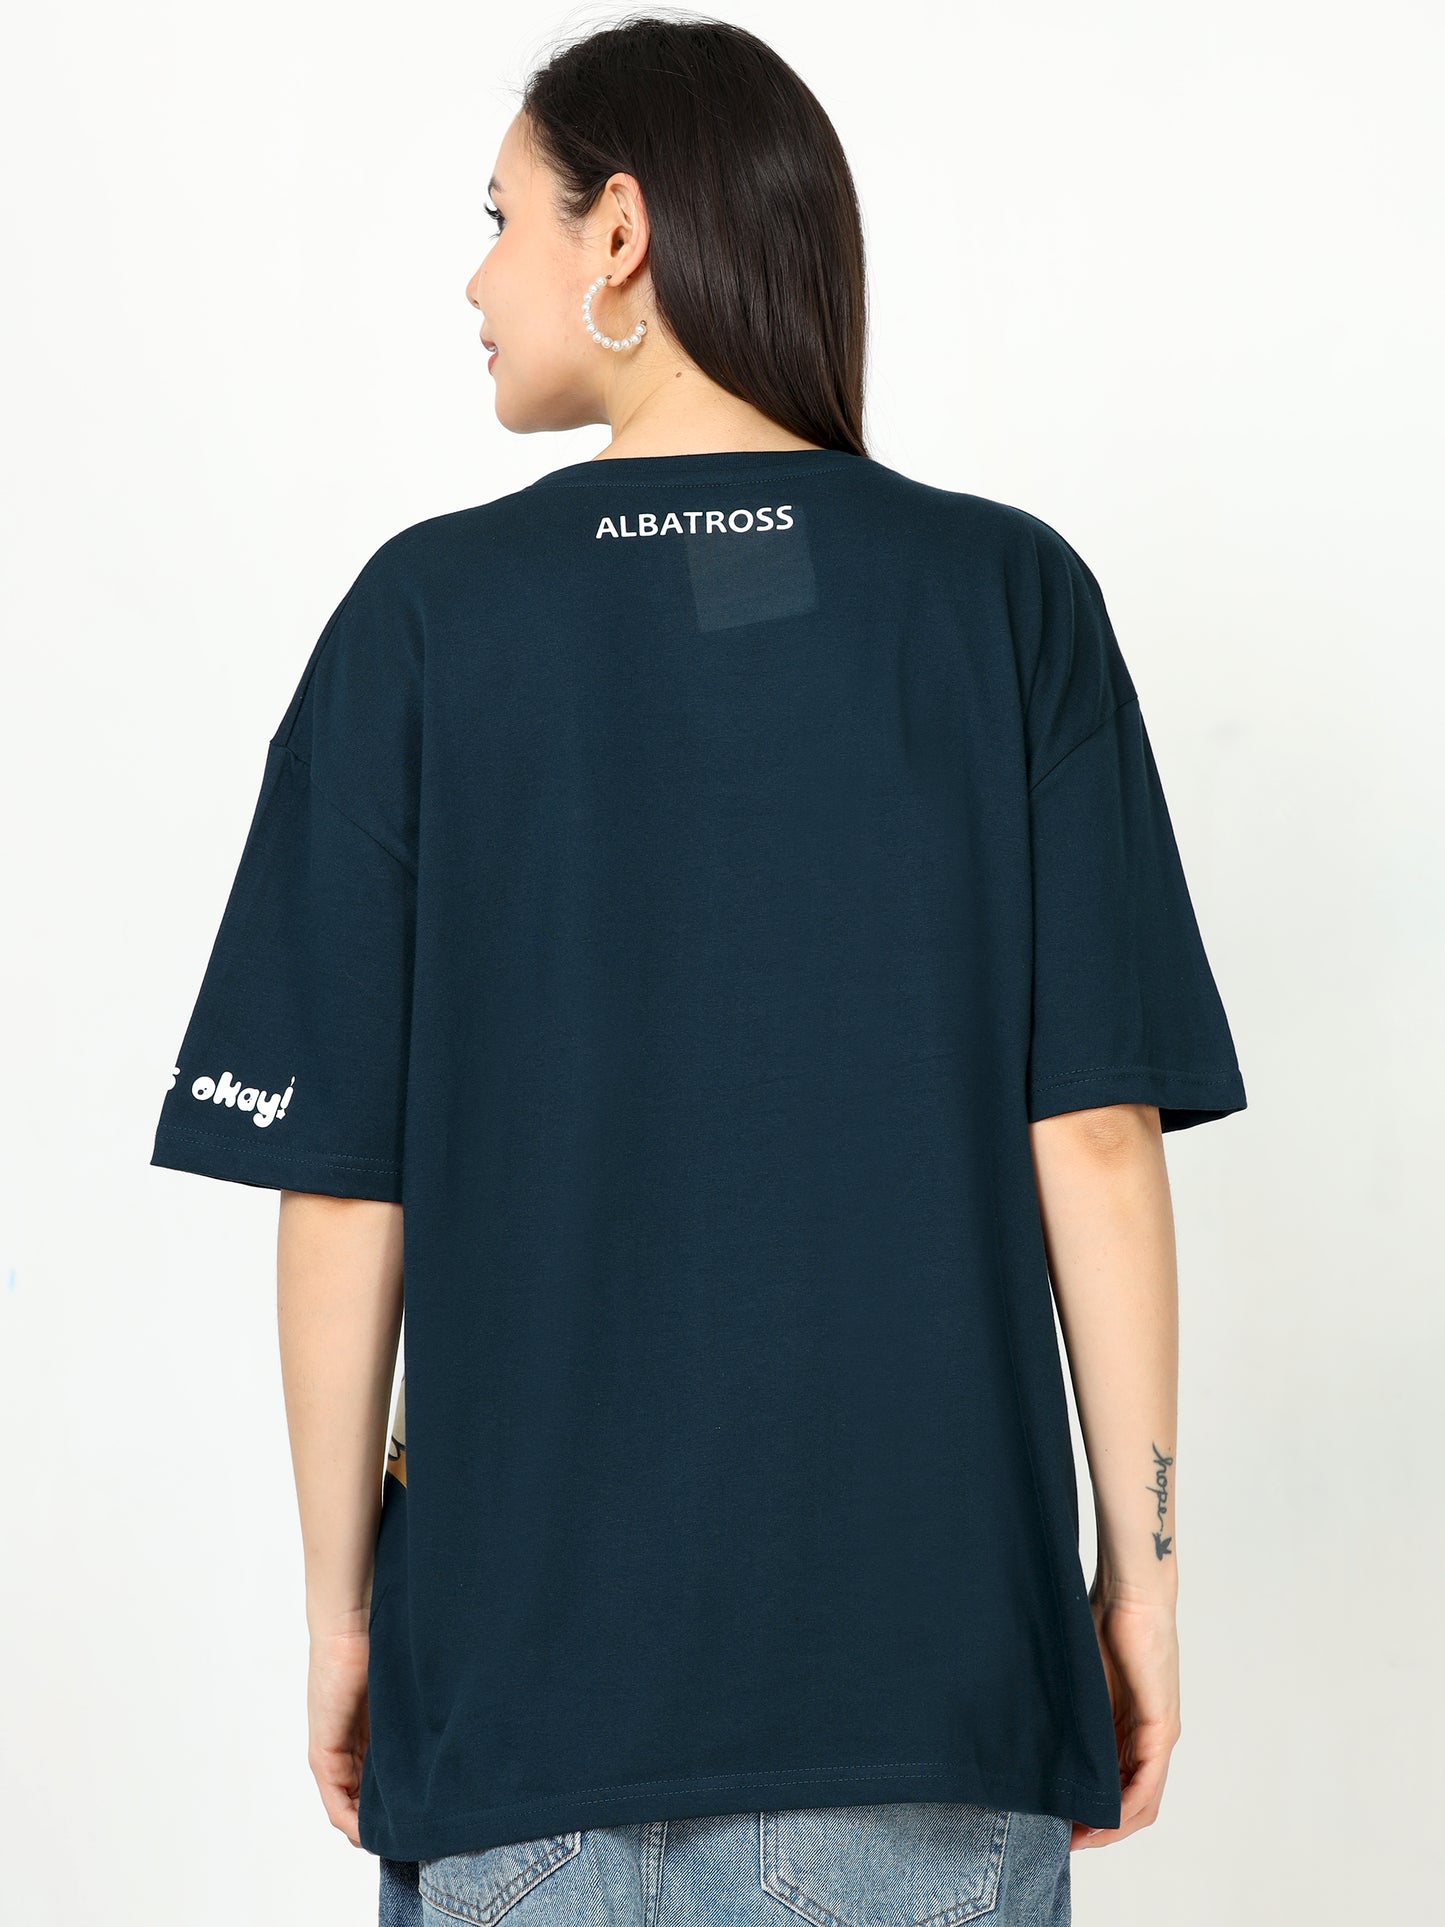 Teal What did you make today Oversized Tshirt for women